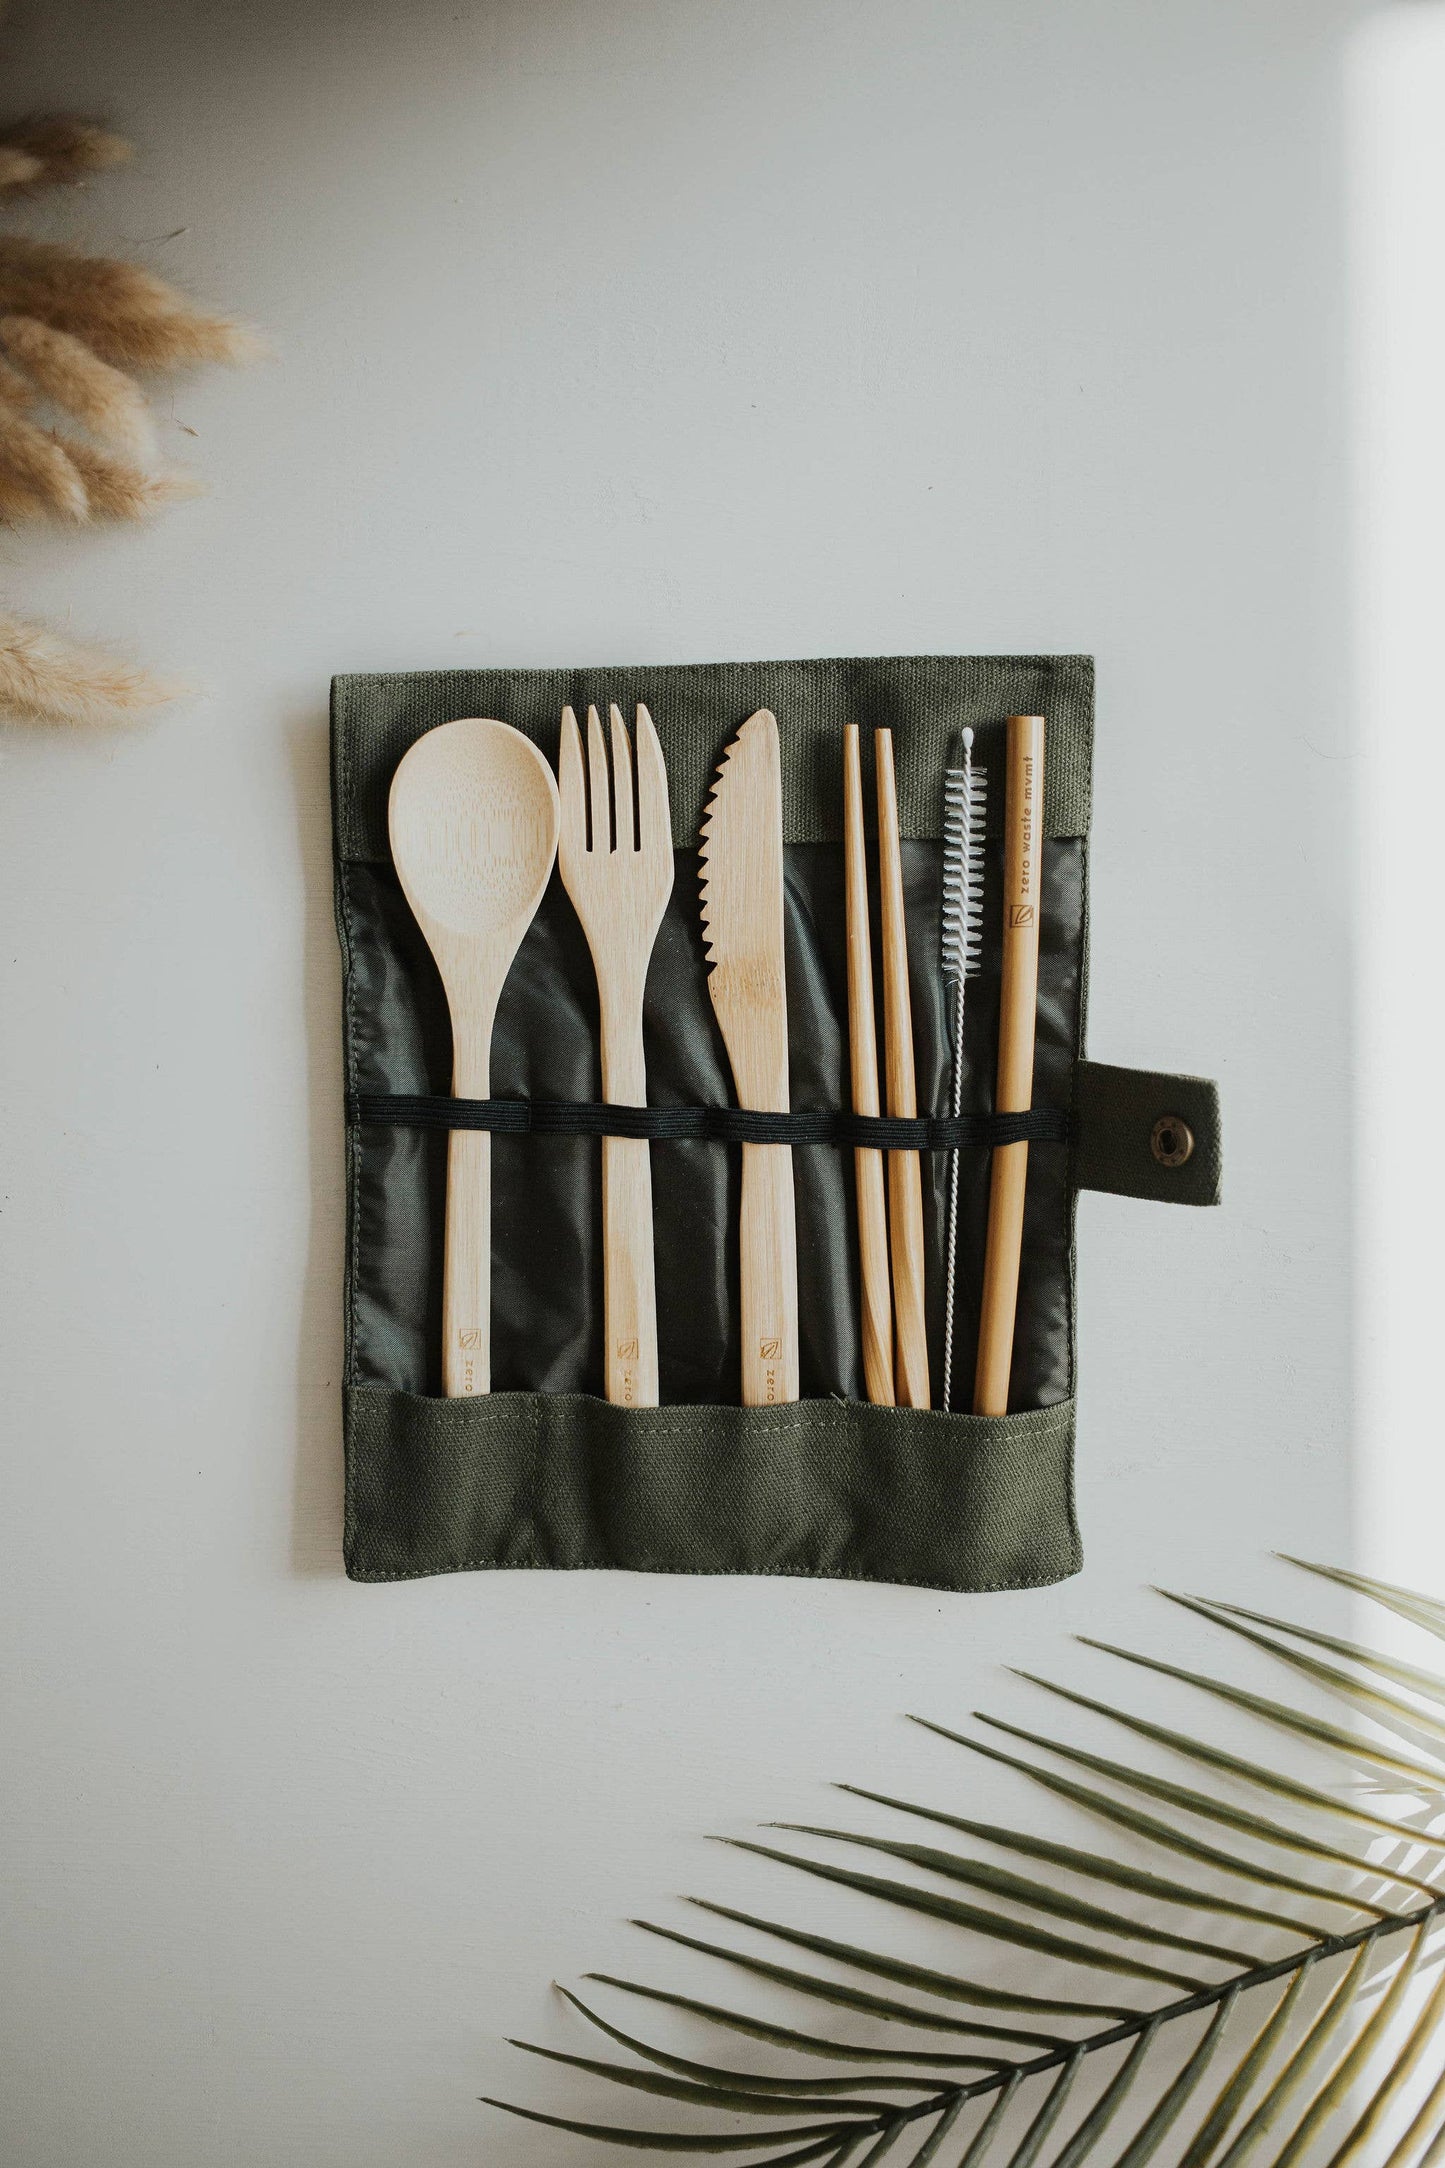 Travel Bamboo Cutlery Set | Eco-Friendly Utensils with Pouch